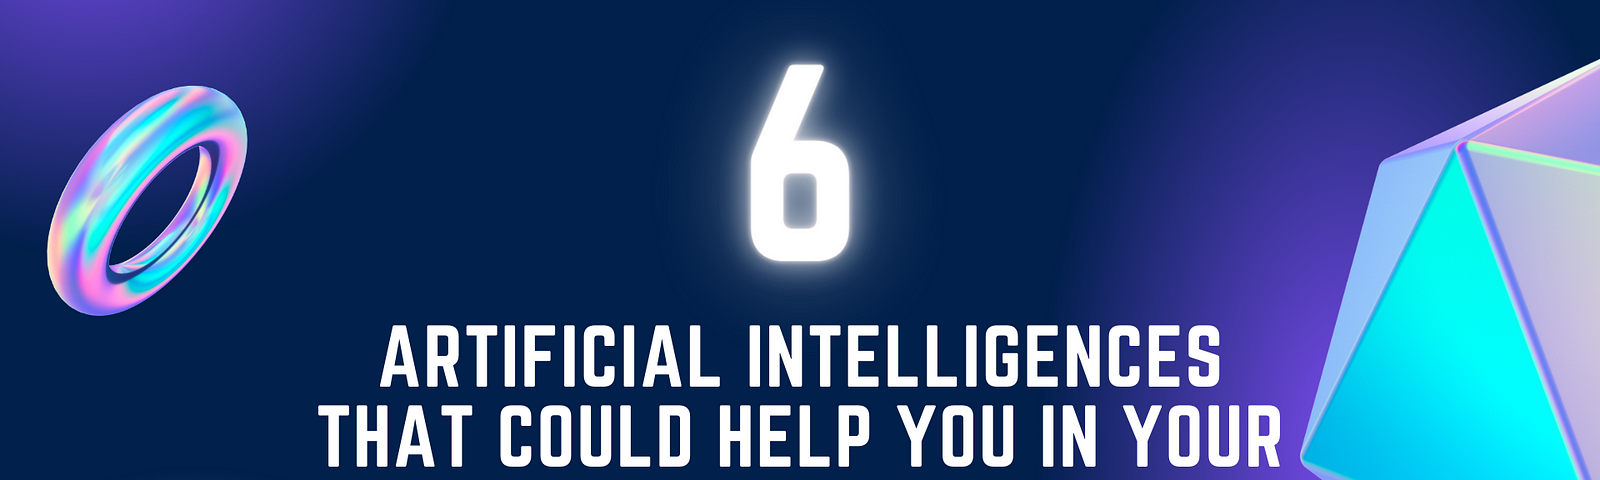 6 Artificial Intelligences that could help you in your daily life